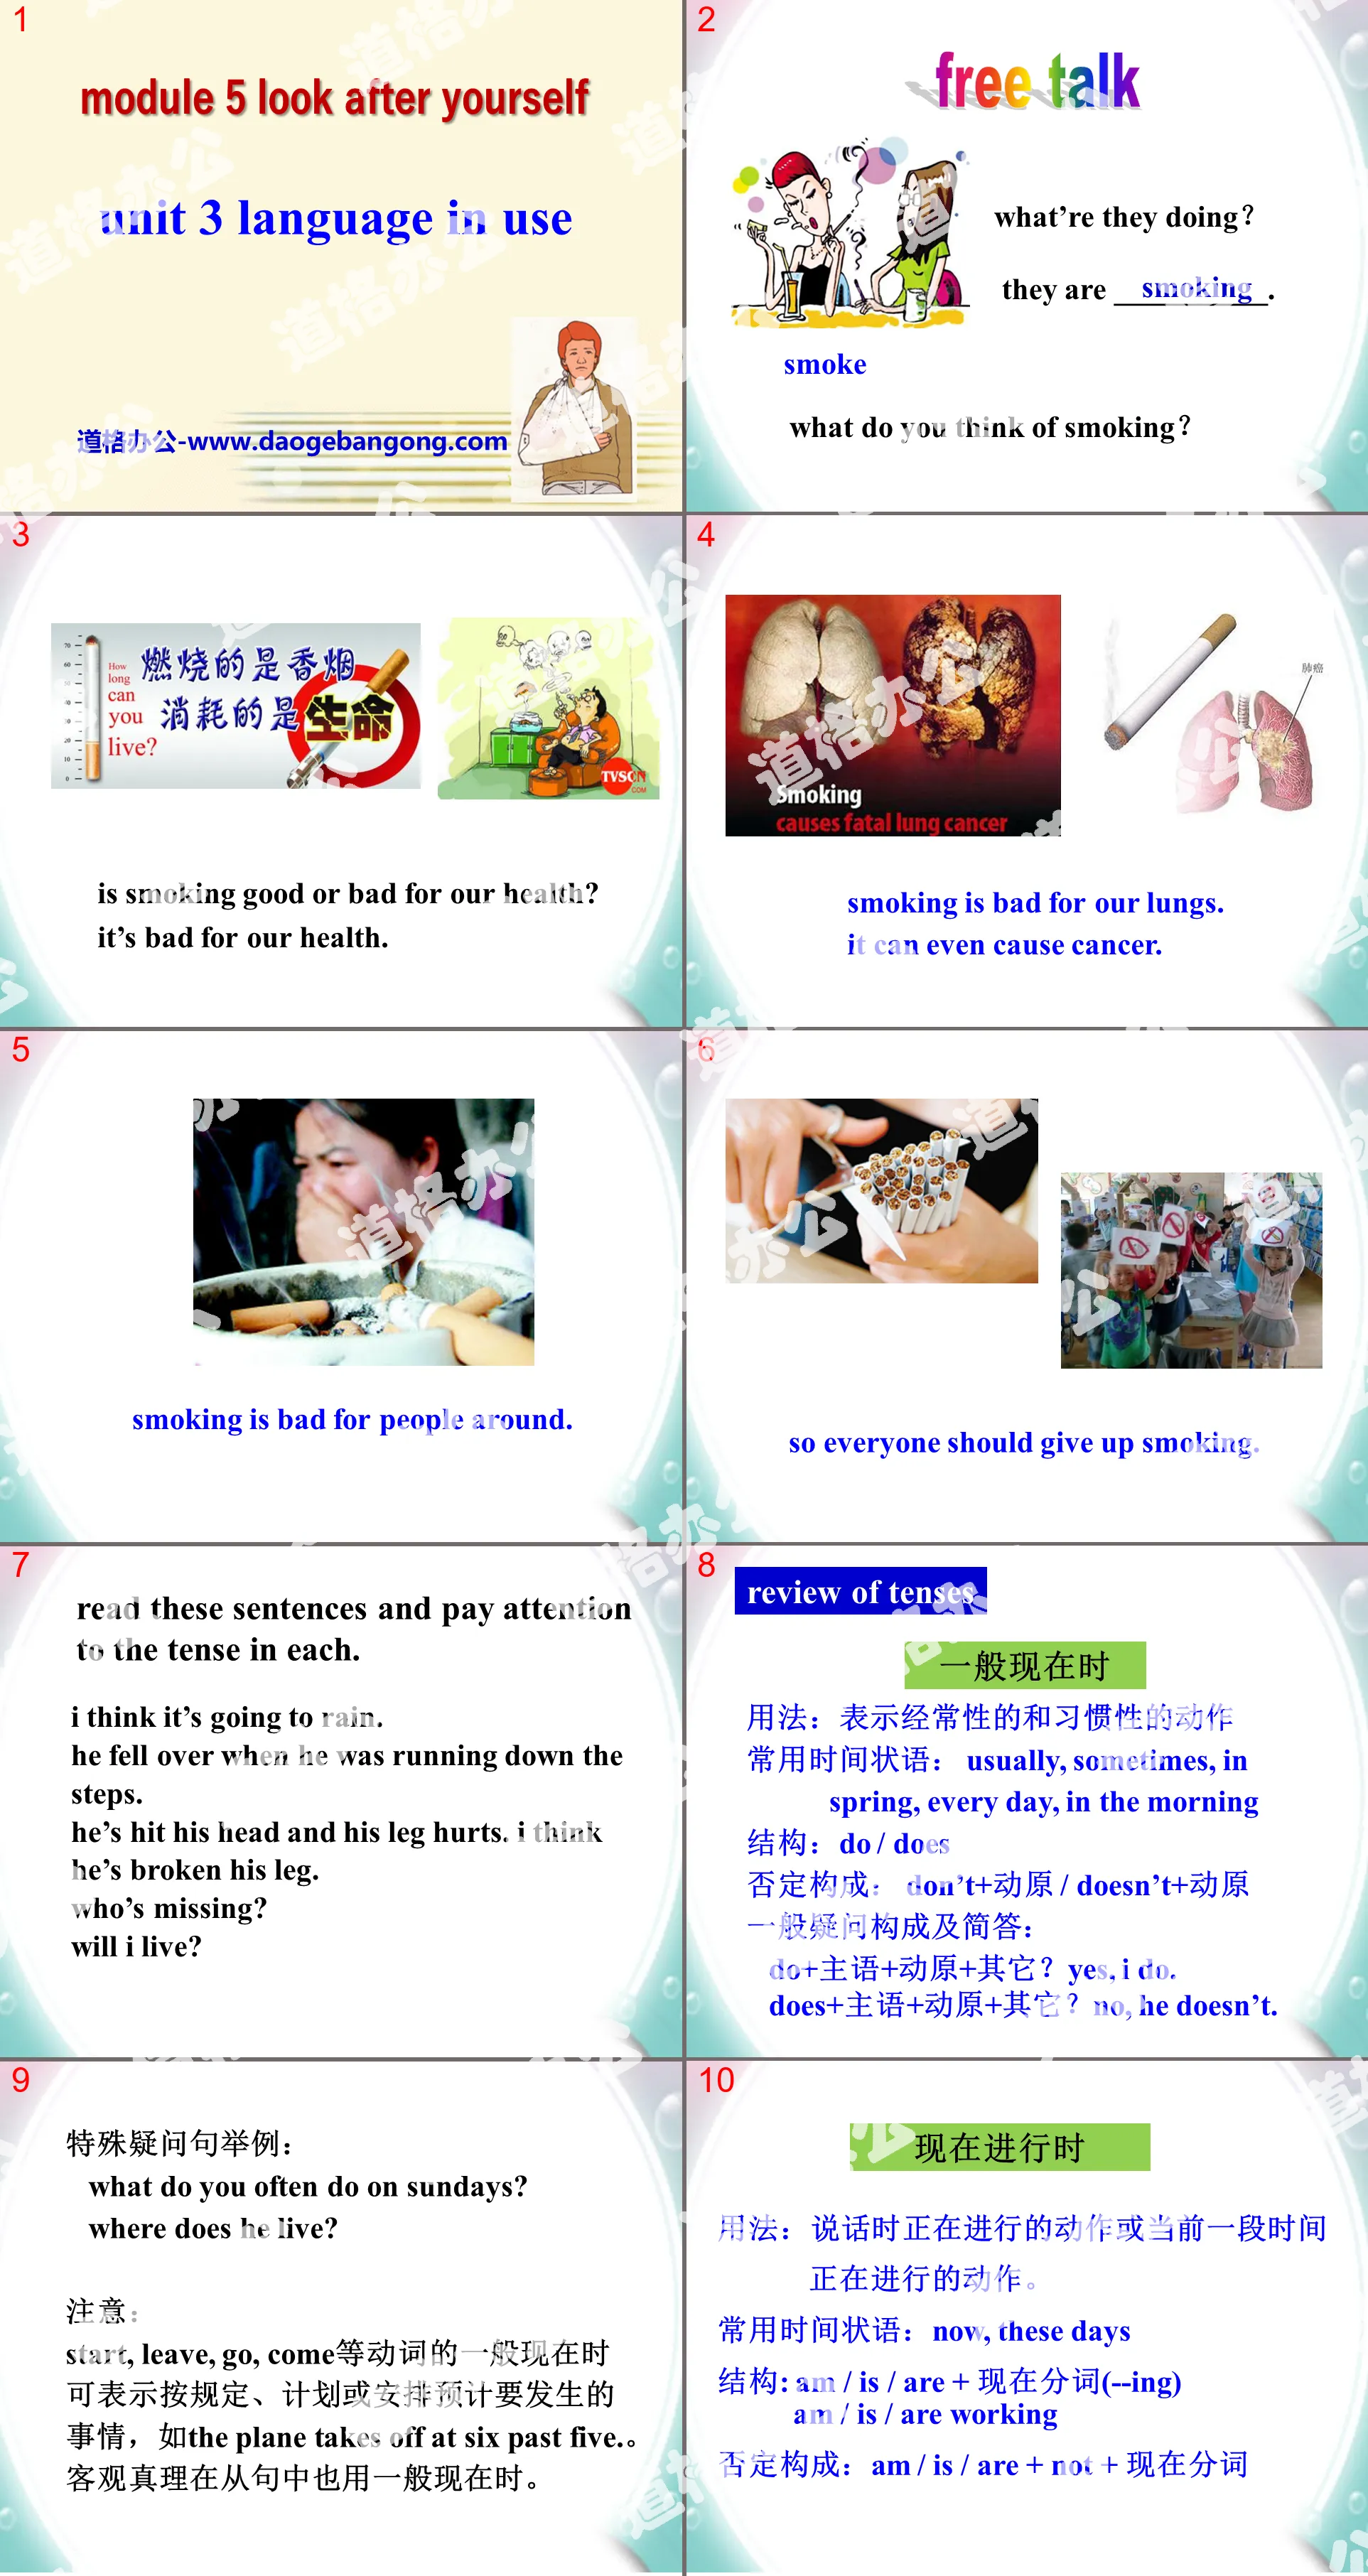 《Language in use》Look after yourself PPT課件